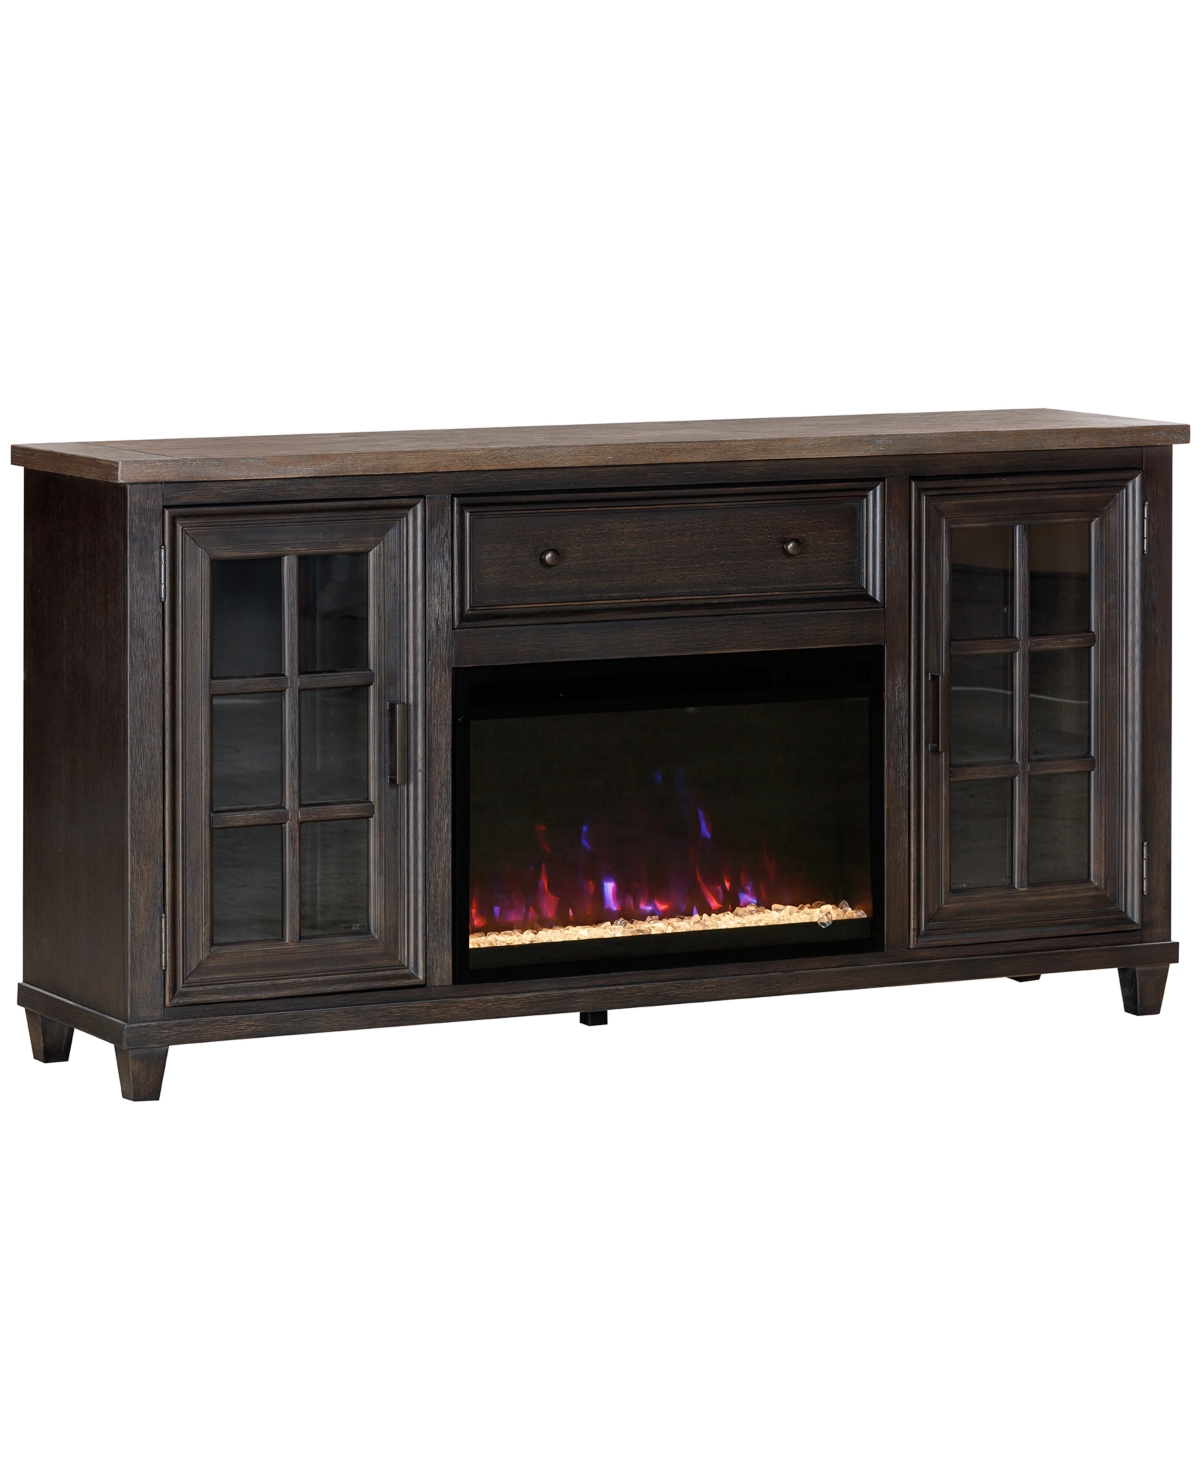 Macy's 65" Dawnwood 2pc Tv Console Set (65" Console And Fireplace) In Espresso